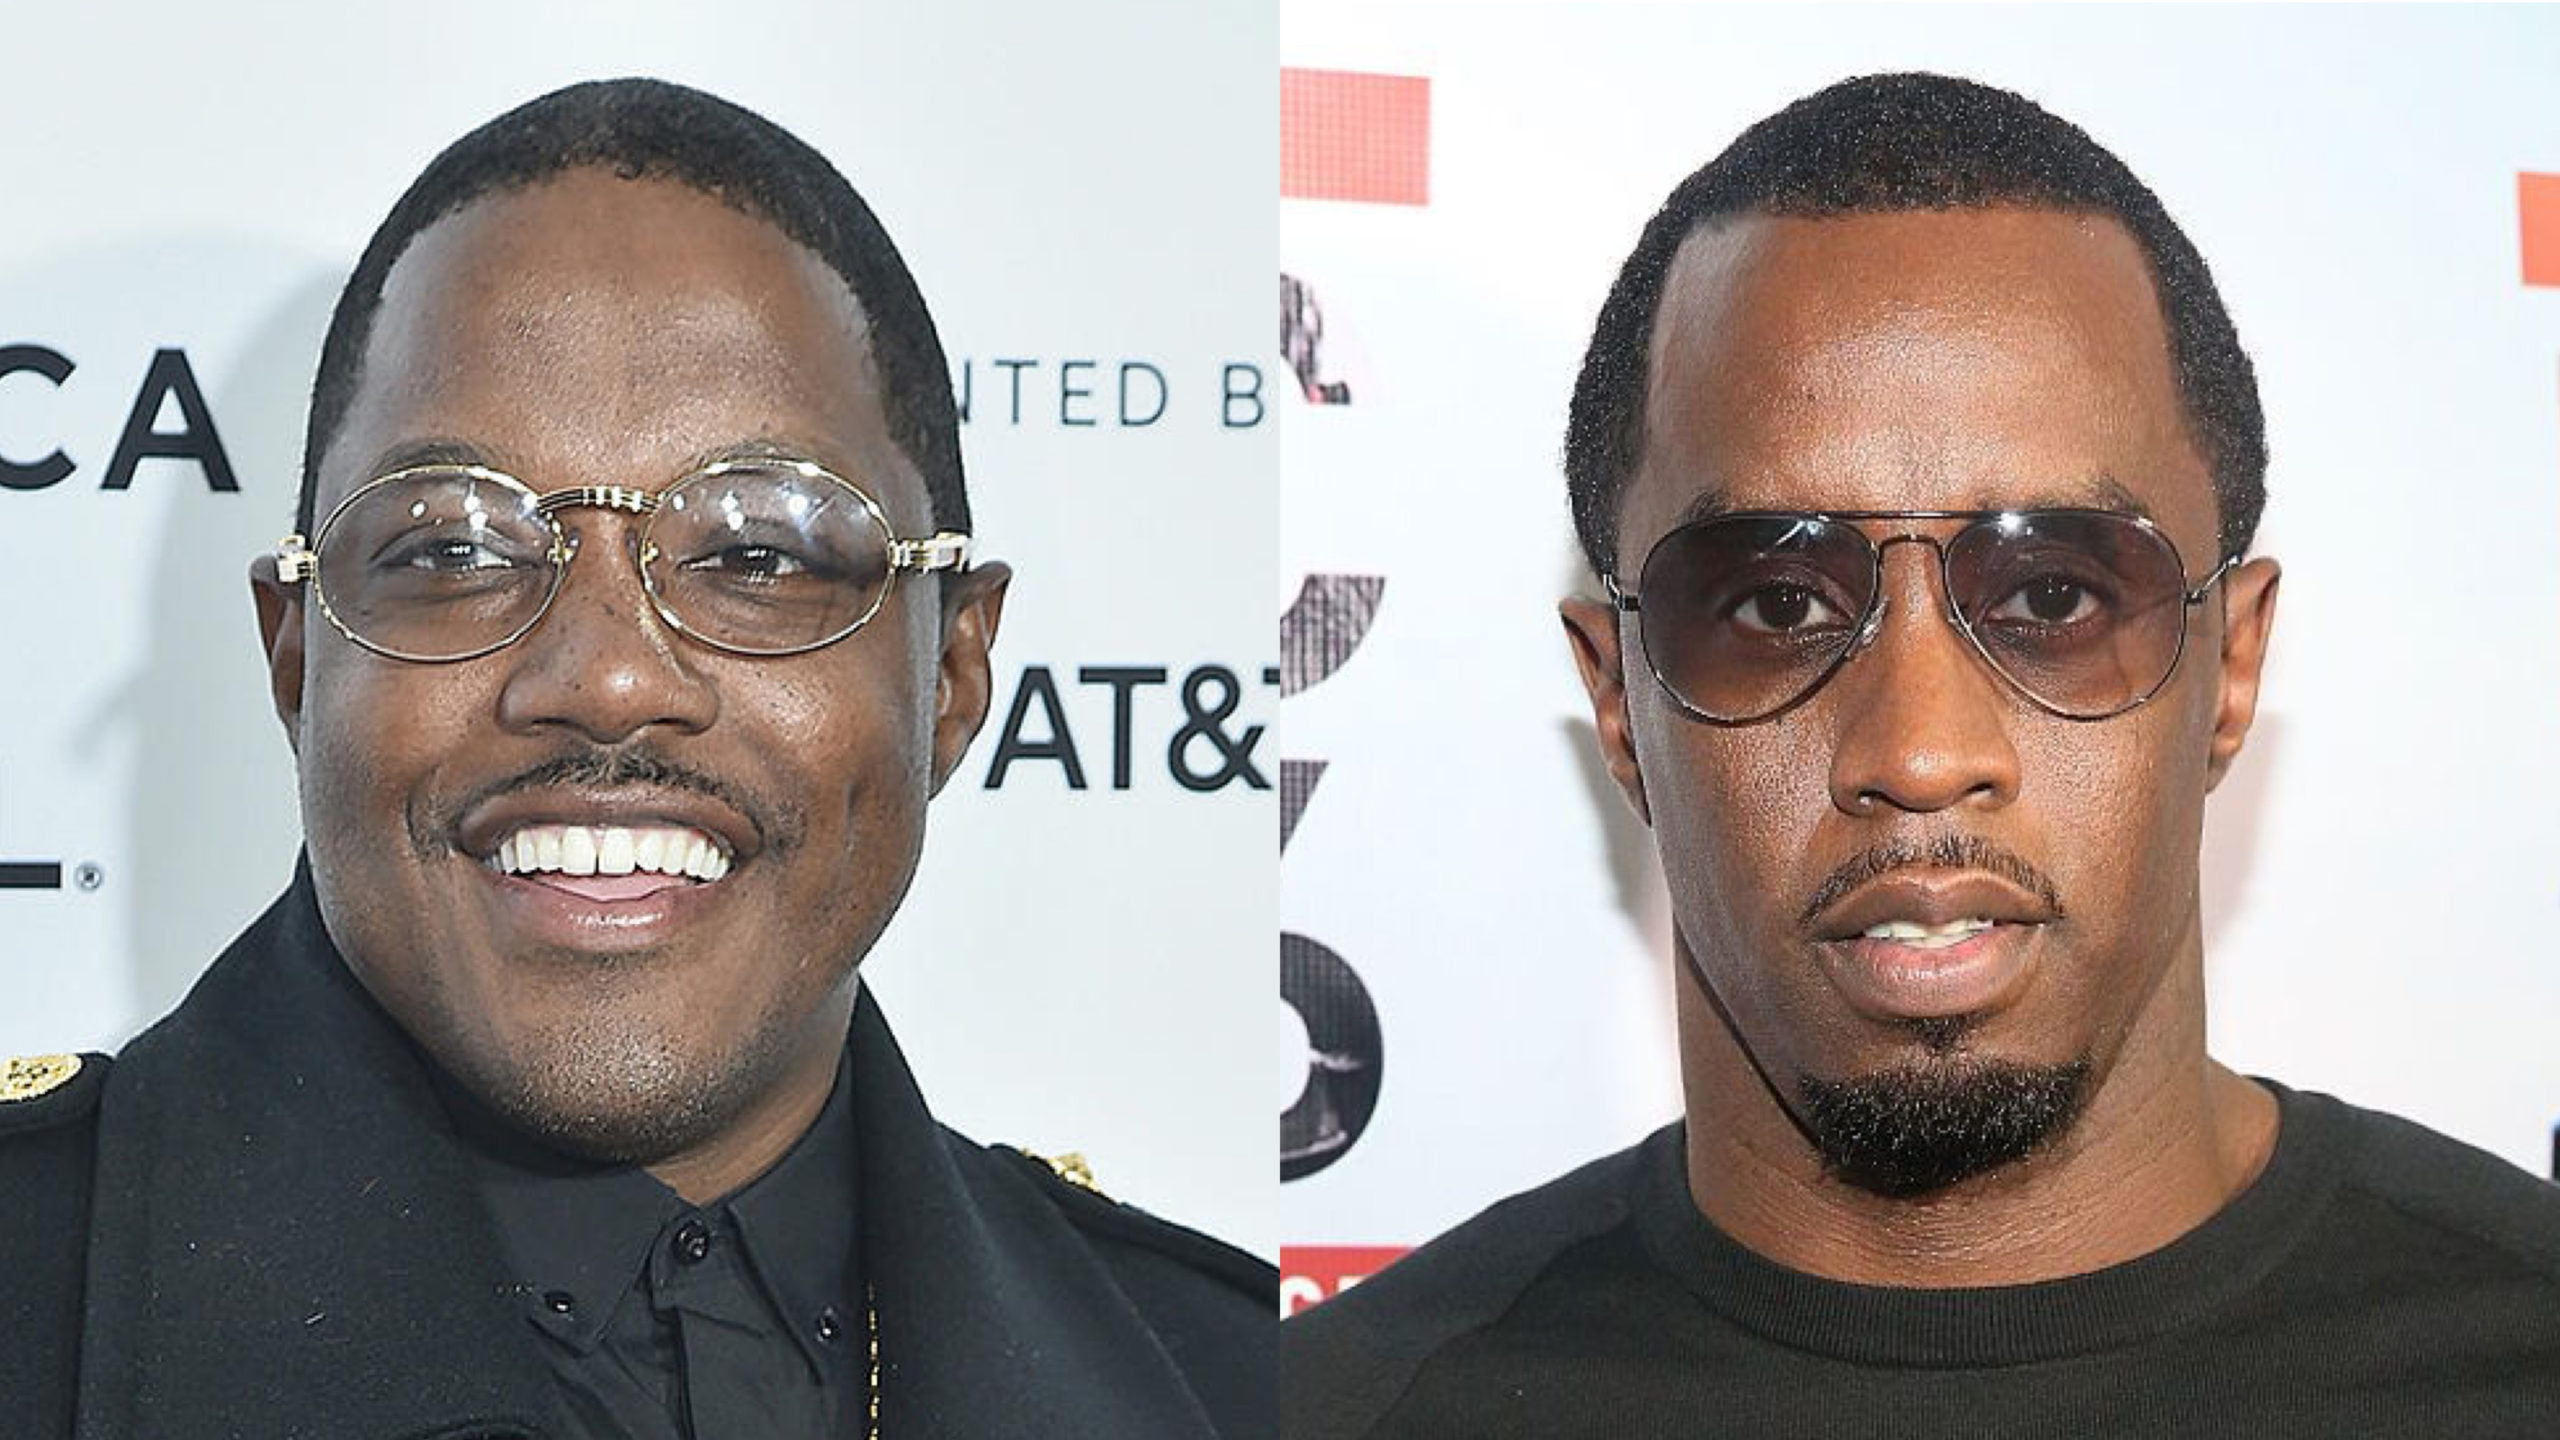 Murda Ma$e Is Back! Rapper Takes Several Shots At Diddy On New Track: 'Love Don't Steal, My N***a Change Ya Name'